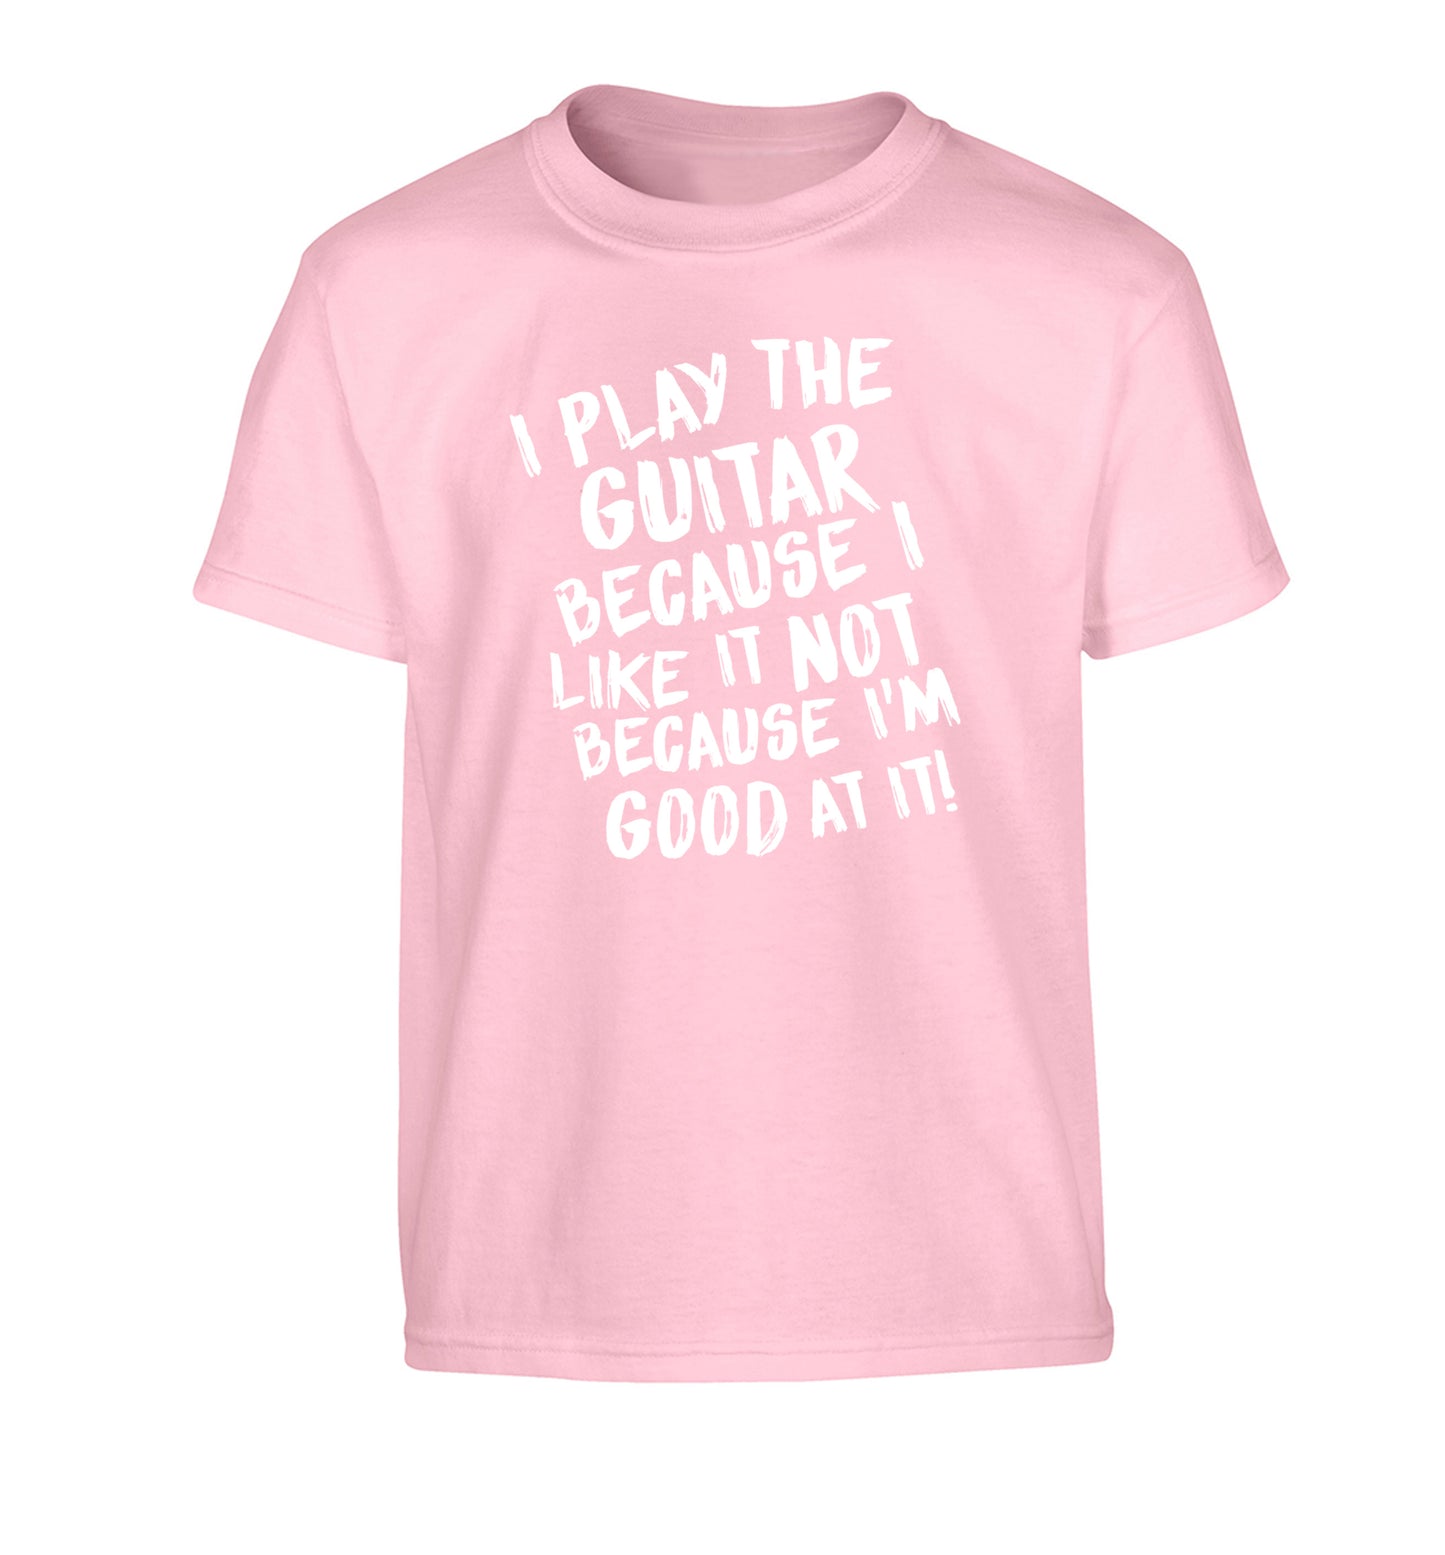 I play the guitar because I like it not because I'm good at it Children's light pink Tshirt 12-14 Years